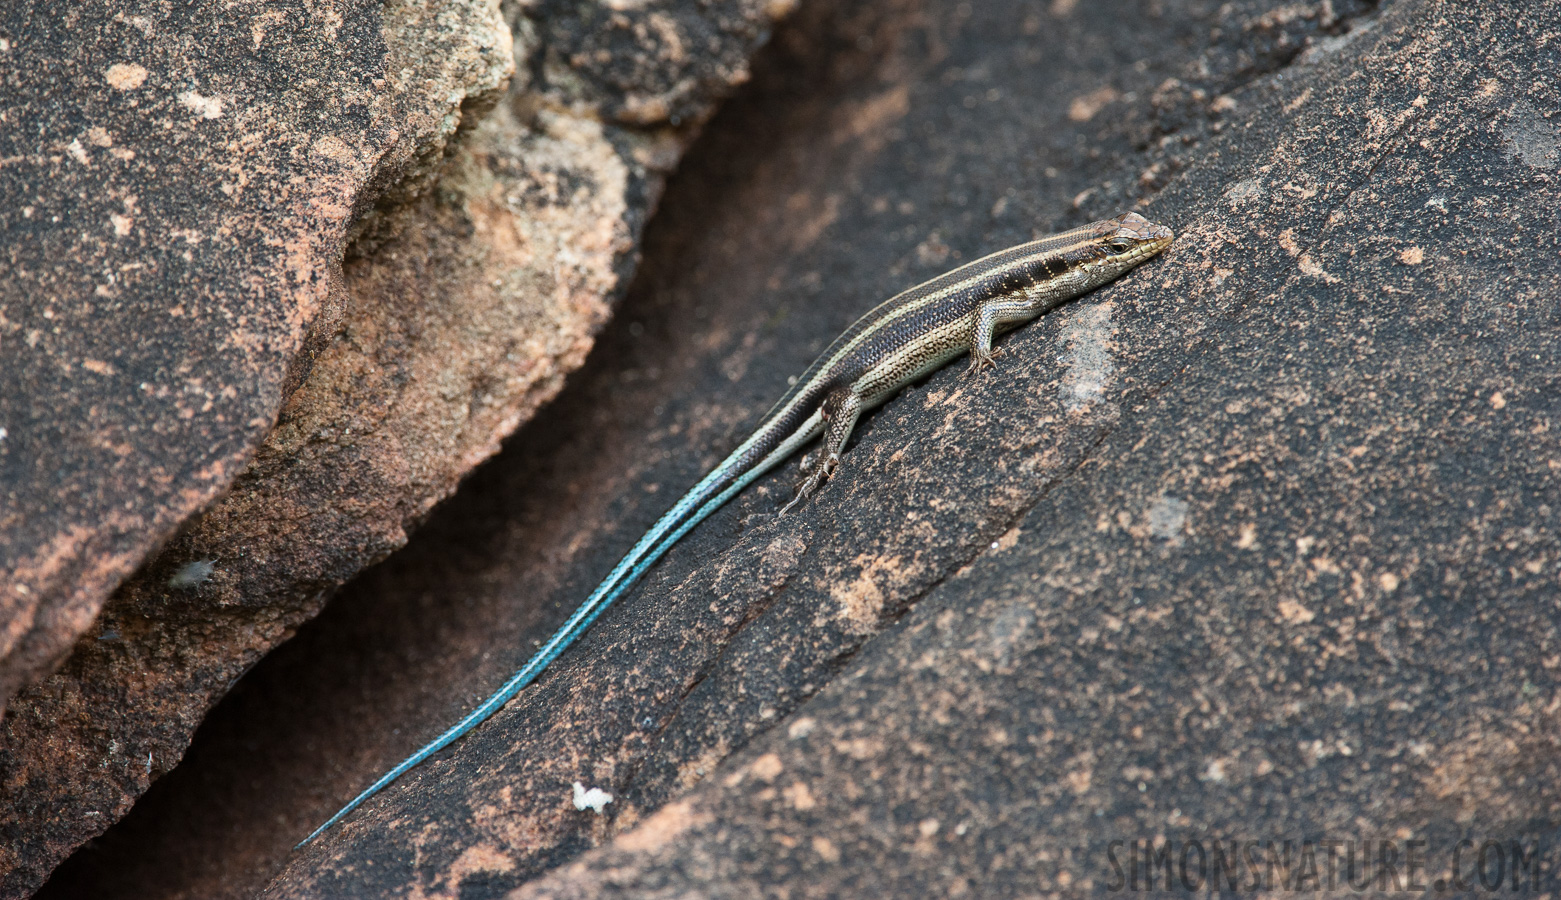 Trachylepis margaritifera [420 mm, 1/200 sec at f / 7.1, ISO 1600]